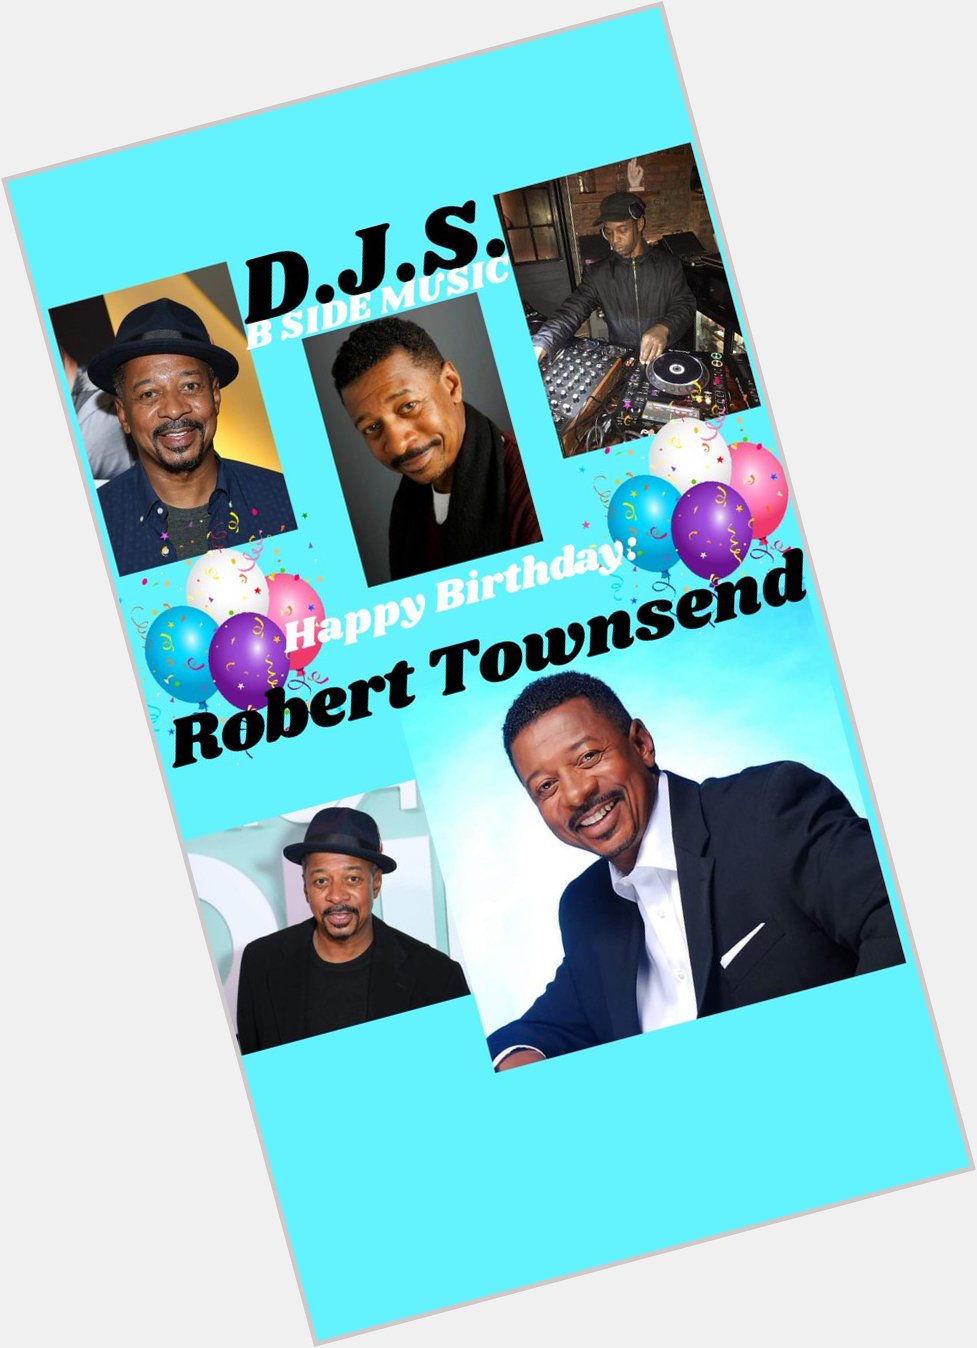 I(D.J.S.)\"B SIDE\" saying Happy Birthday to Actor/Director/Comedian/Writer, \"ROBETOWNSEND\"!!! 